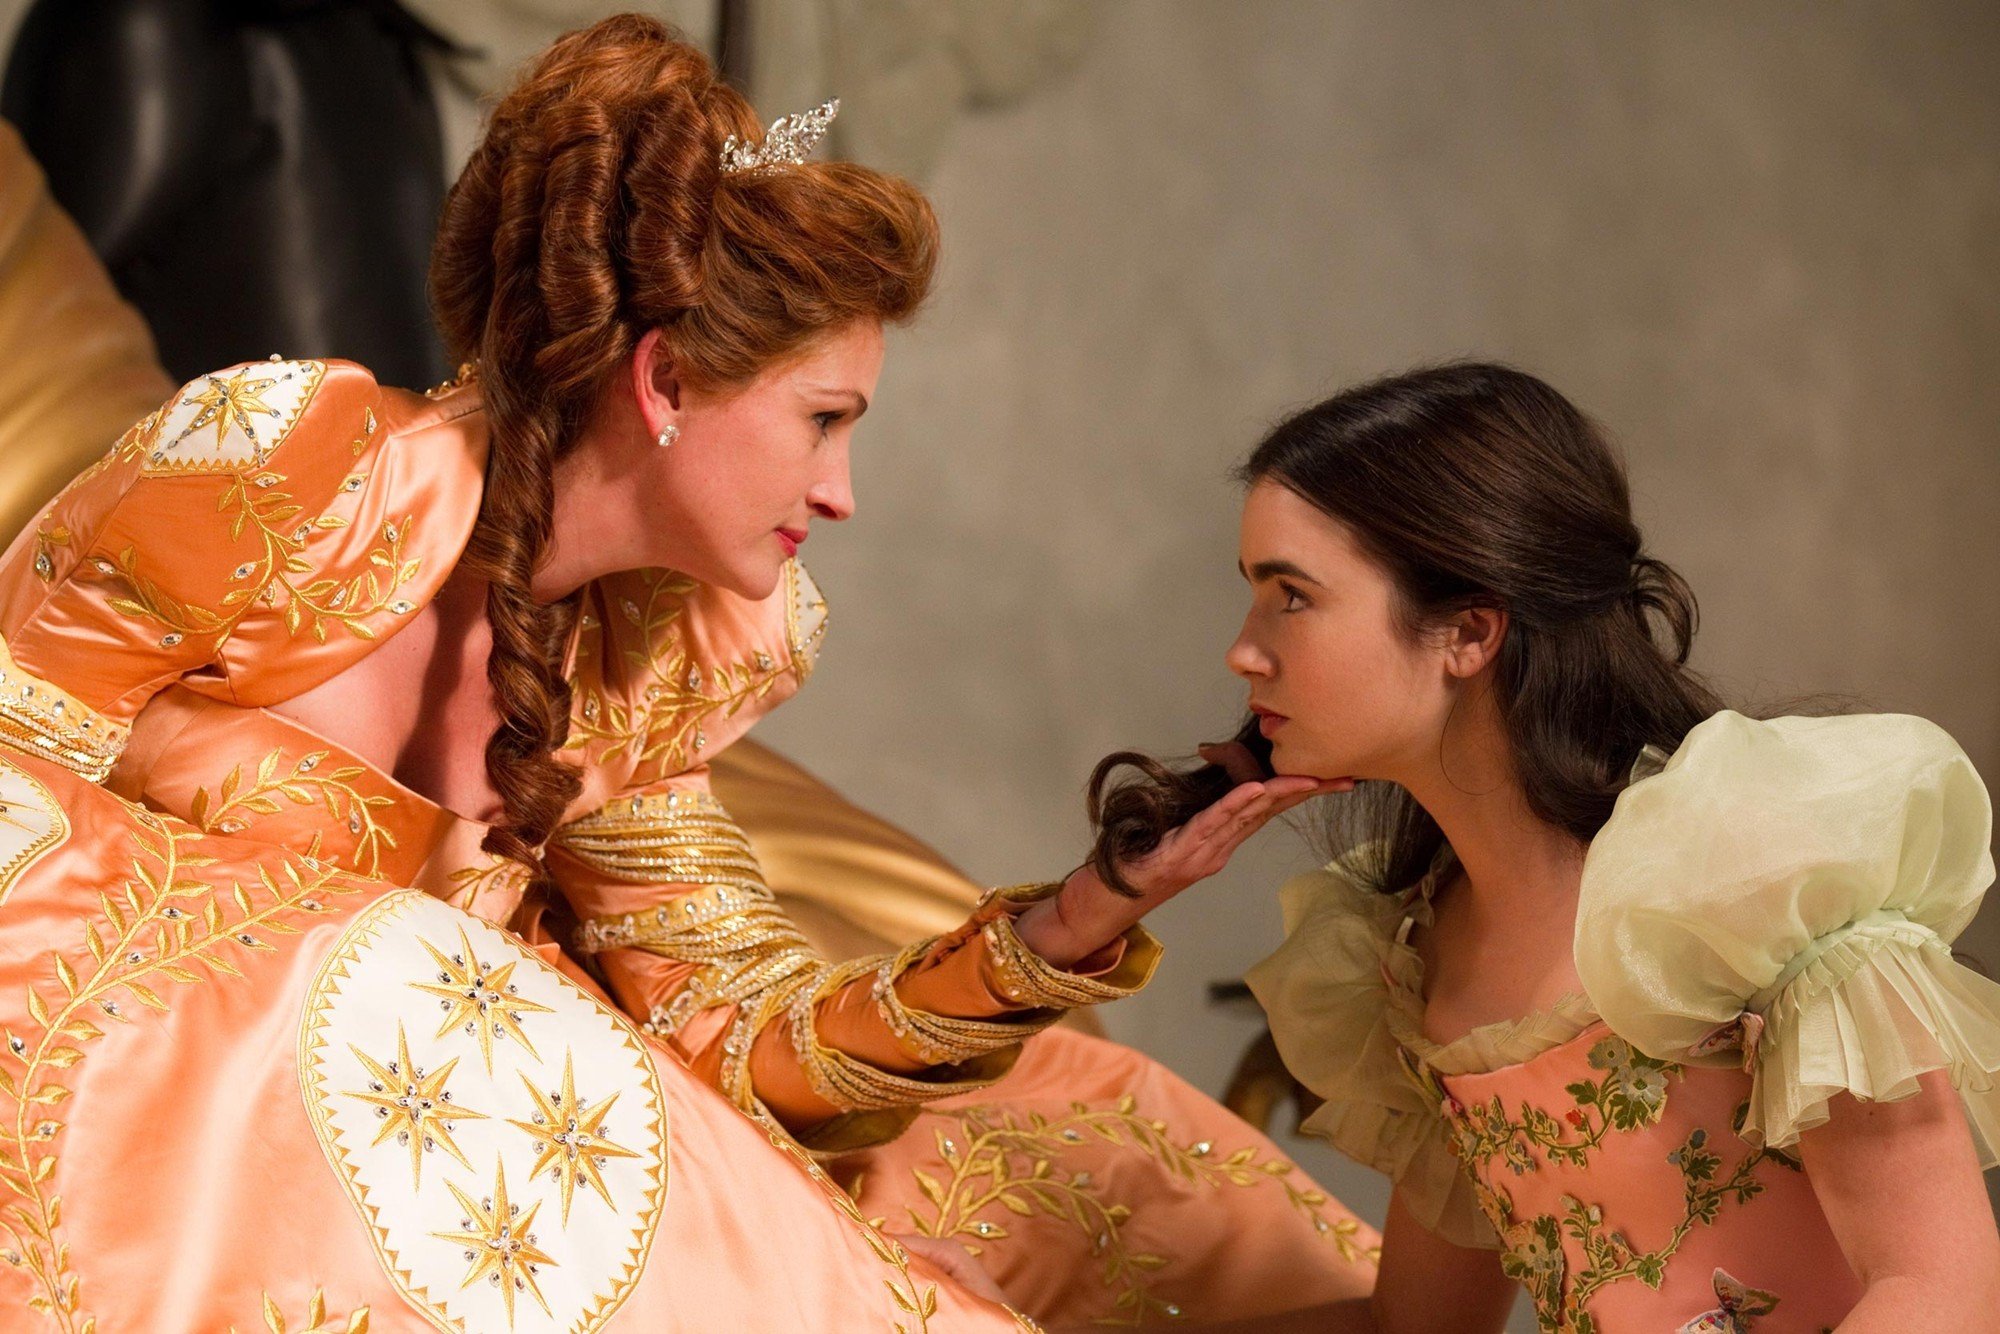 Julia Roberts stars as Evil Queen and Lily Collins stars as Snow White in Relativity Media's Mirror Mirror (2012). Photo credit by Jan Thijs.